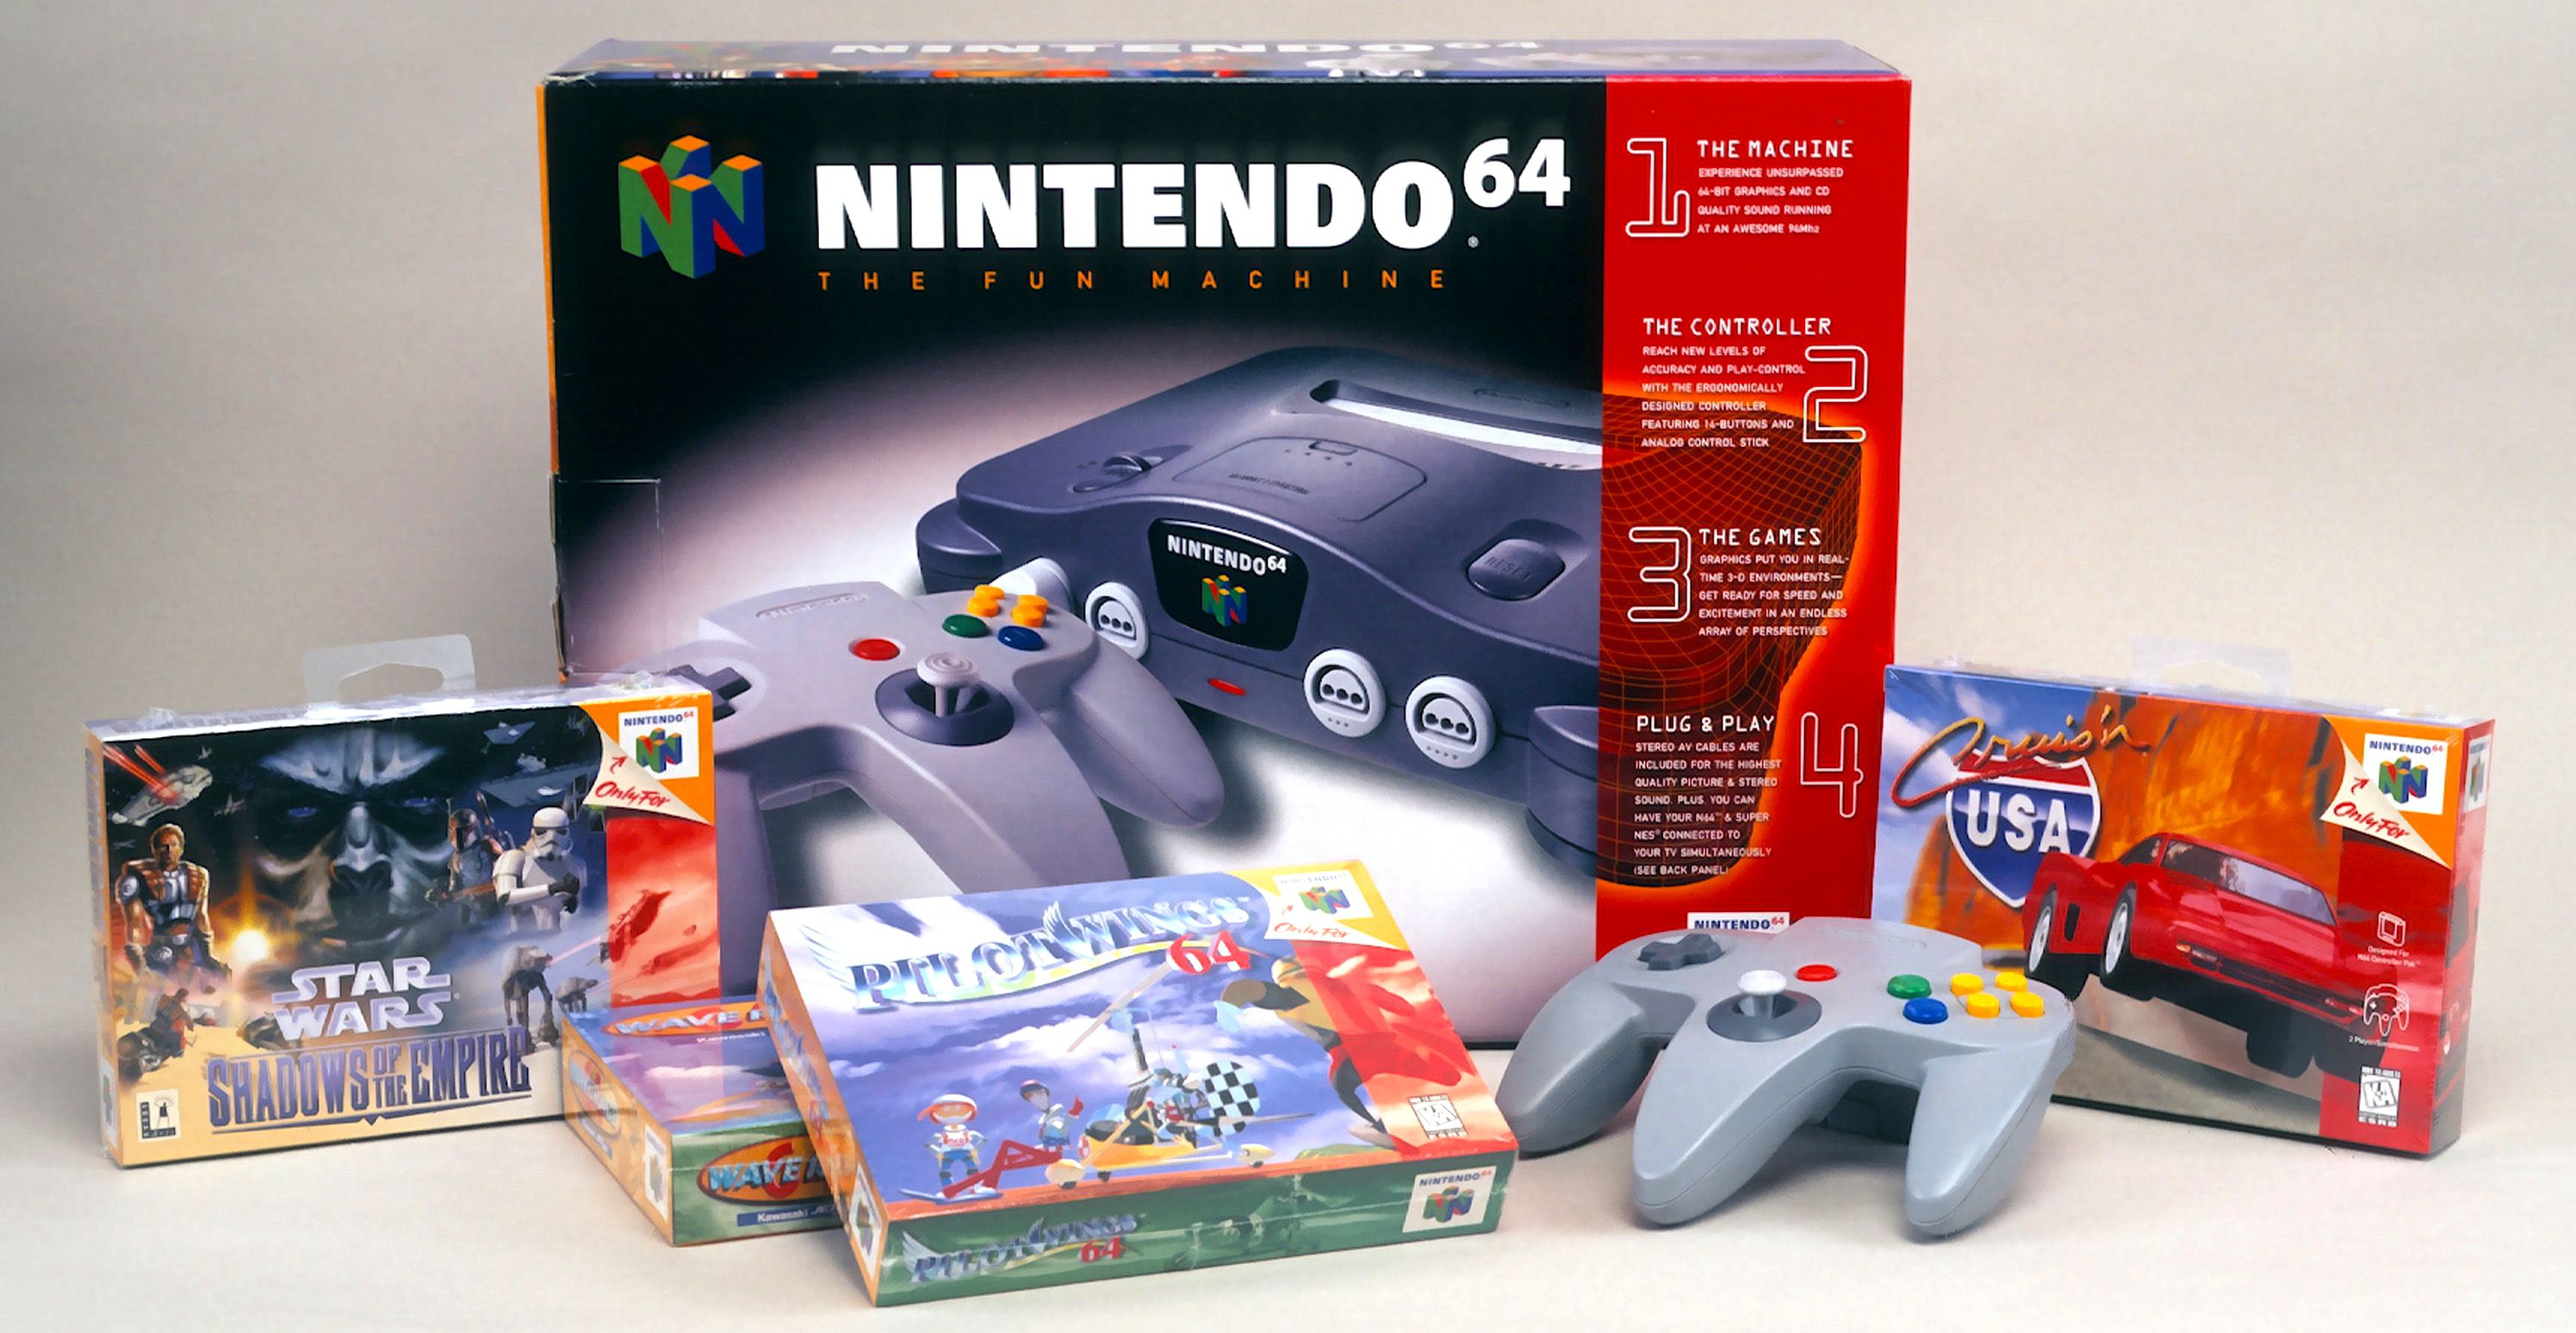 A Nintendo 64 Classic May Be Coming Soon - Where to Find